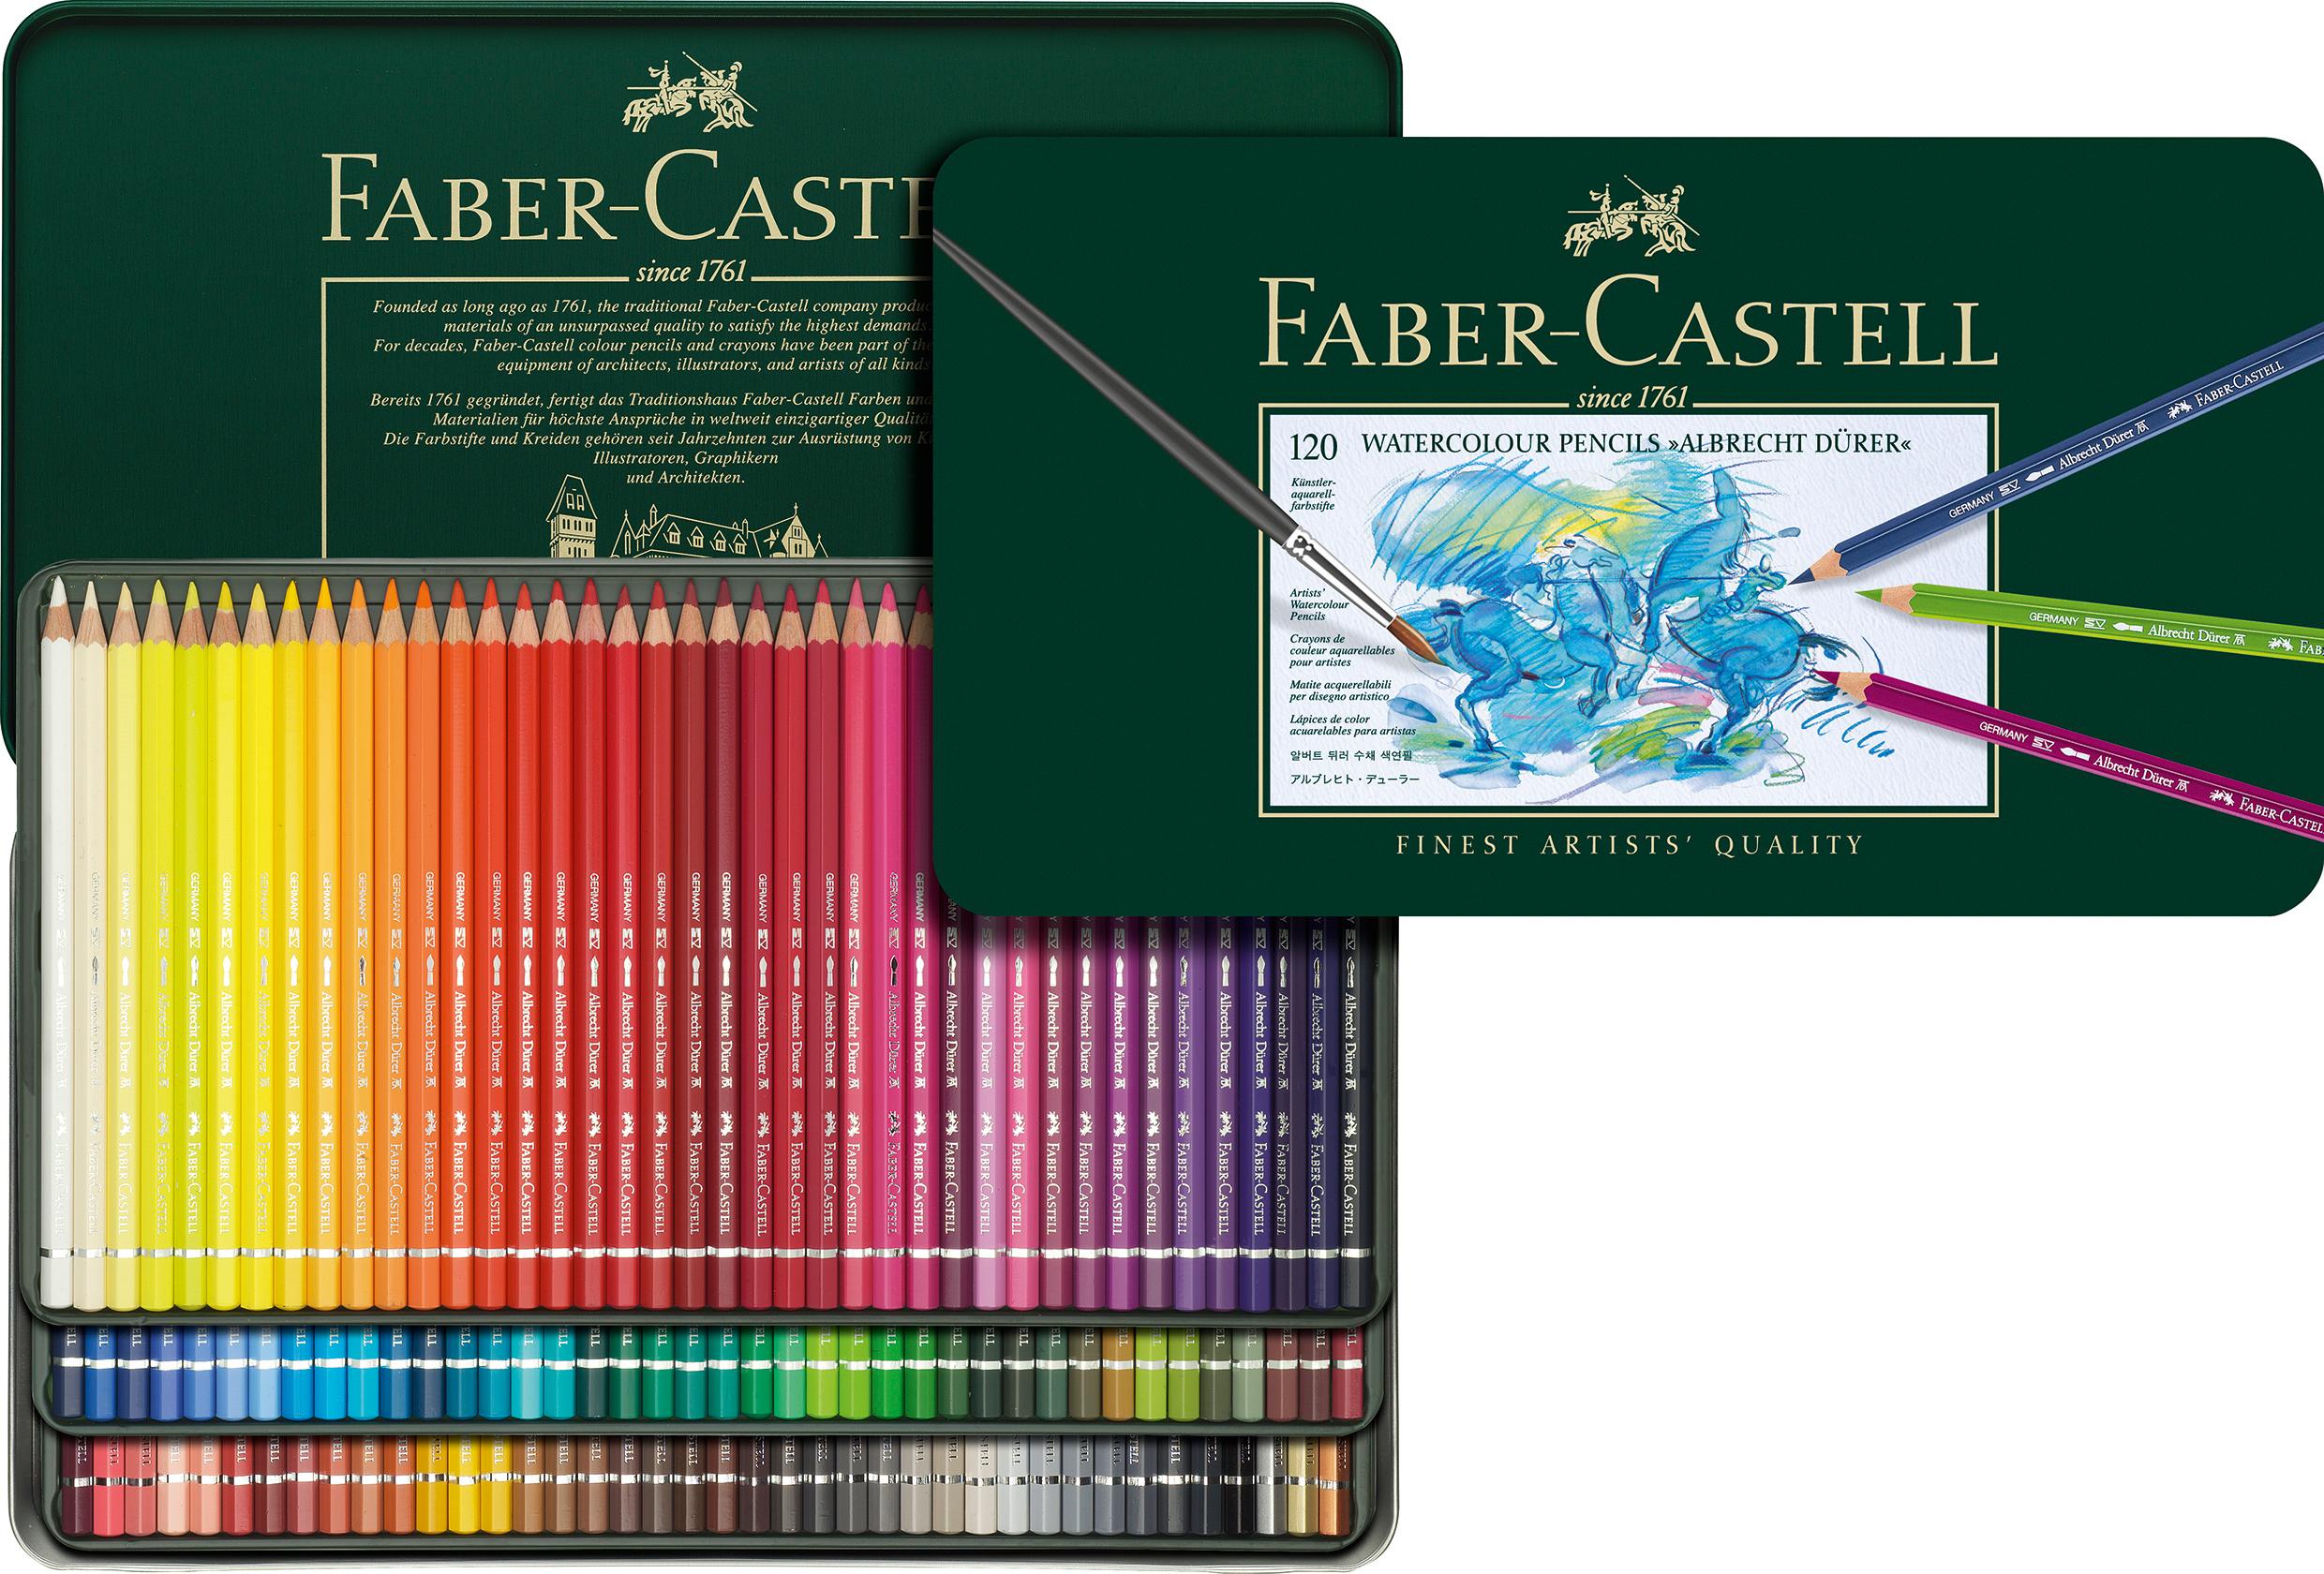 faber castell ecco pigment review